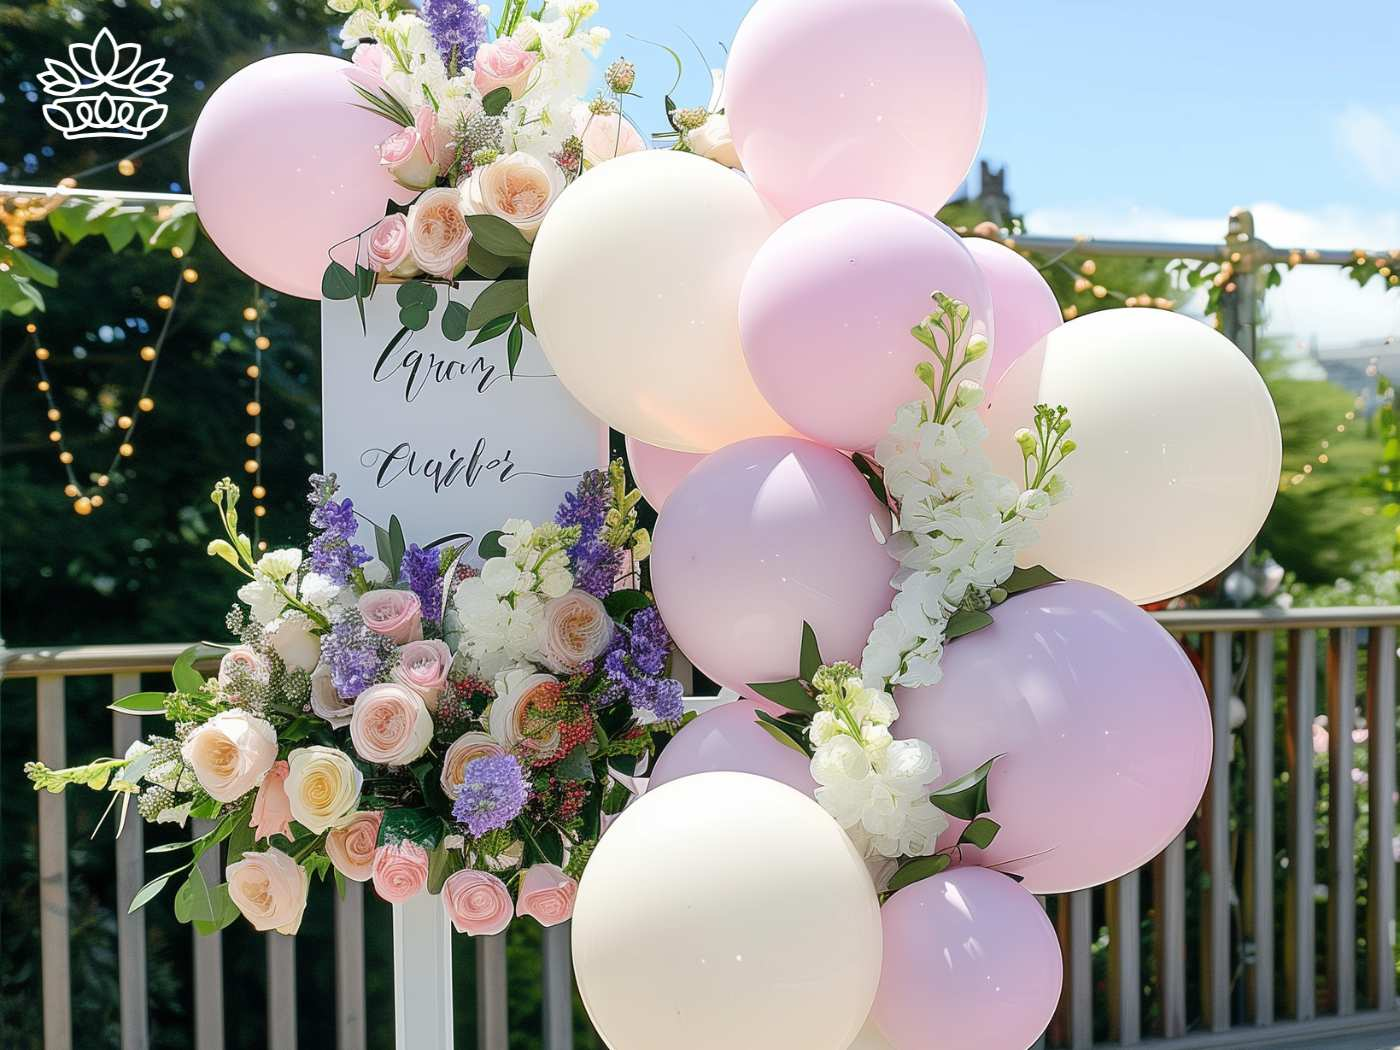 A vibrant display of soft pink and white balloons intertwined with a lush arrangement of roses and delicate wildflowers, ready for a grand celebration with Fabulous Flowers and Gifts.